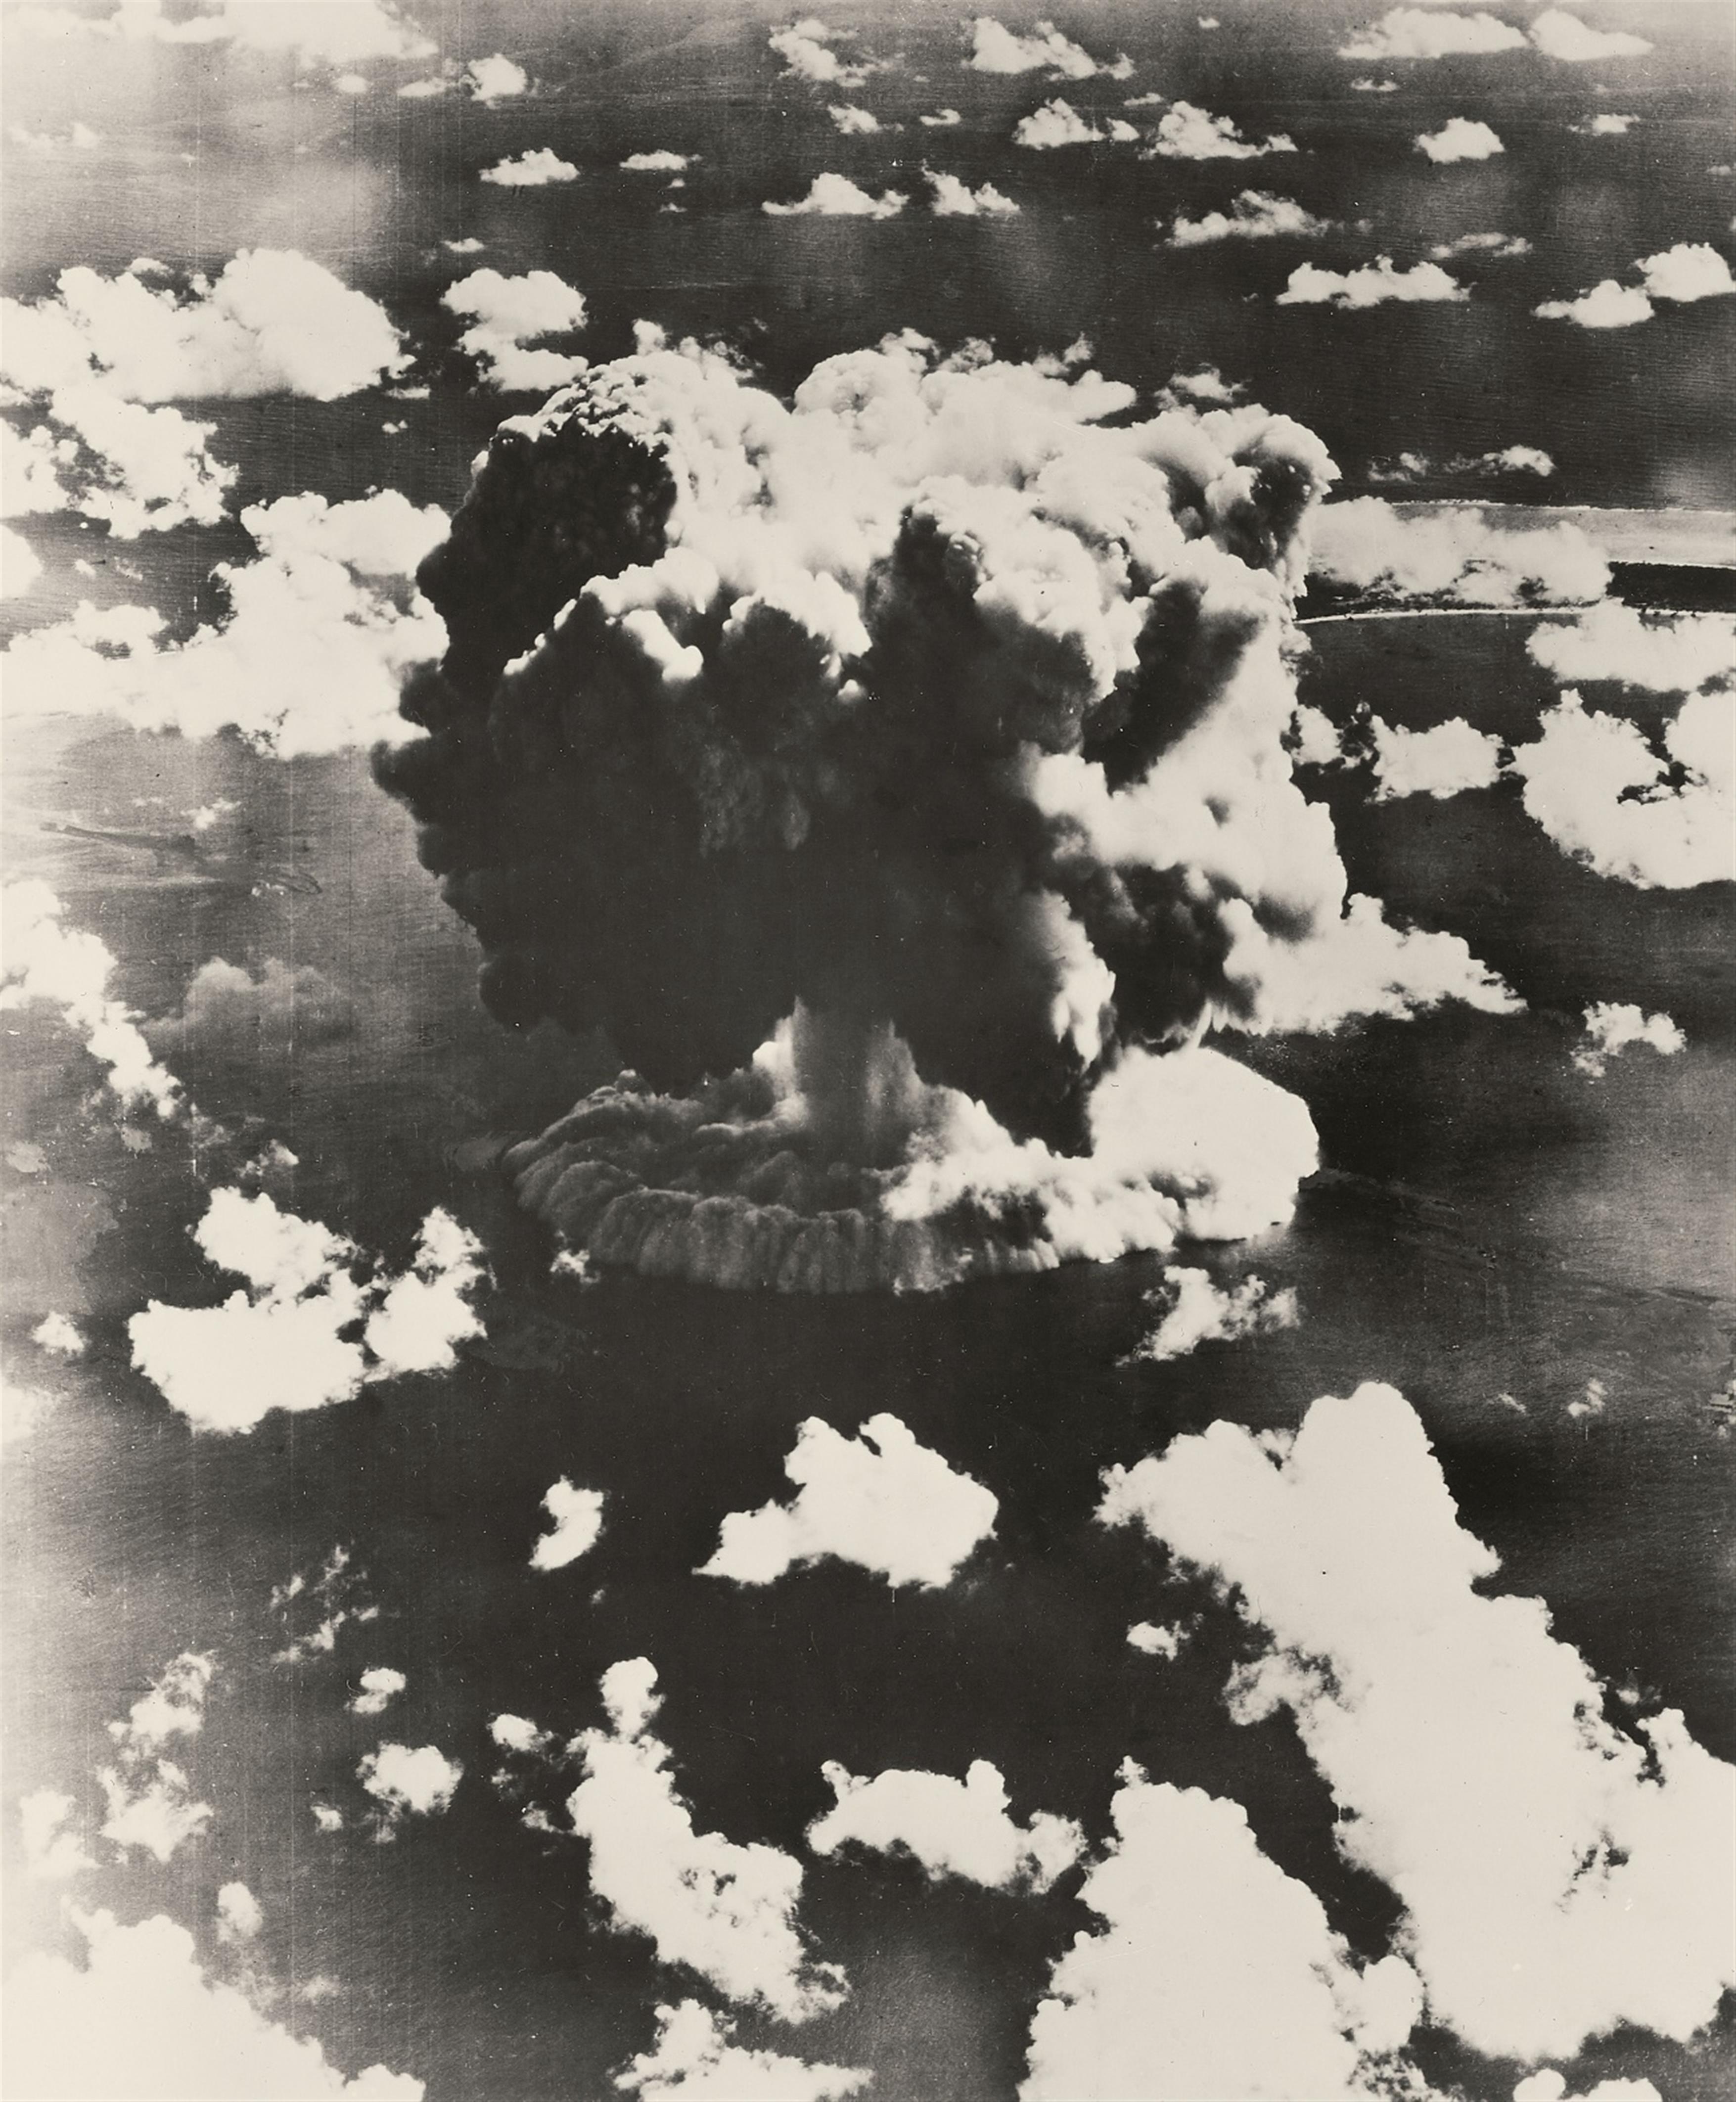 Joint Army Task Force One Photo - "Operation Crossroads" - Views of the Bikini Atoll nuclear Tests - image-13